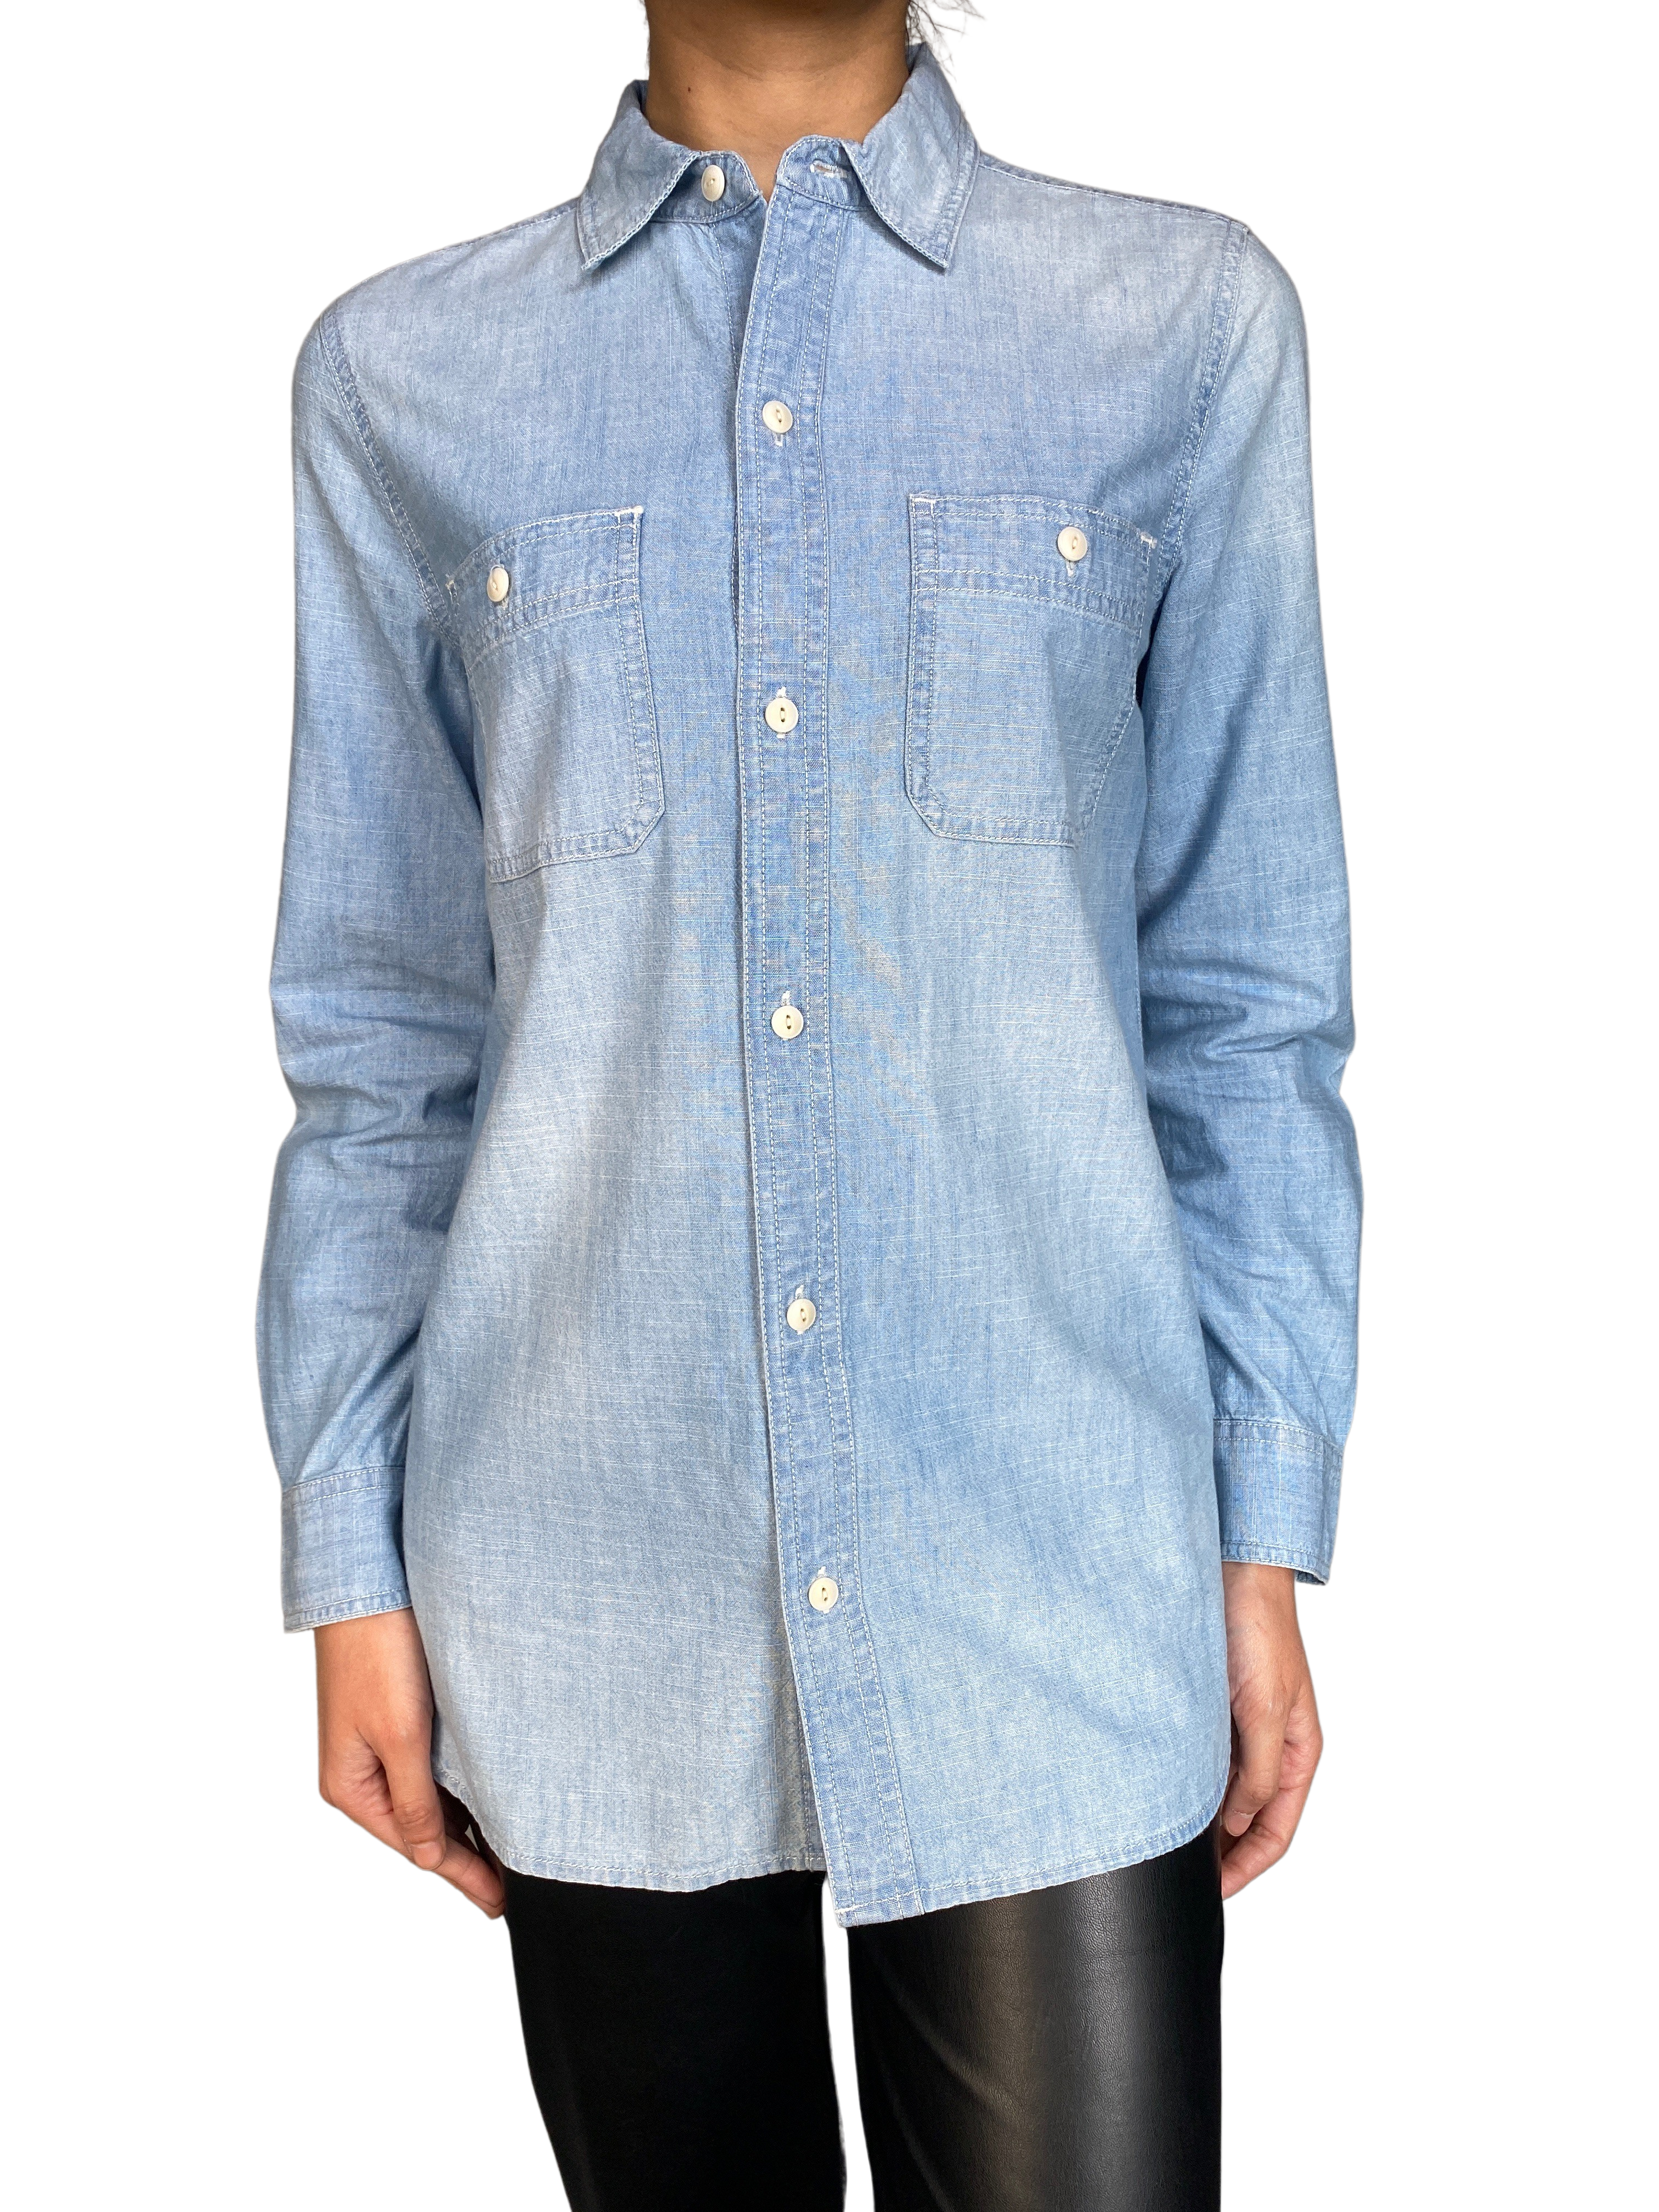 POLO RALPH LAUREN RELAXED FIT CHAMBRAY SHIRT